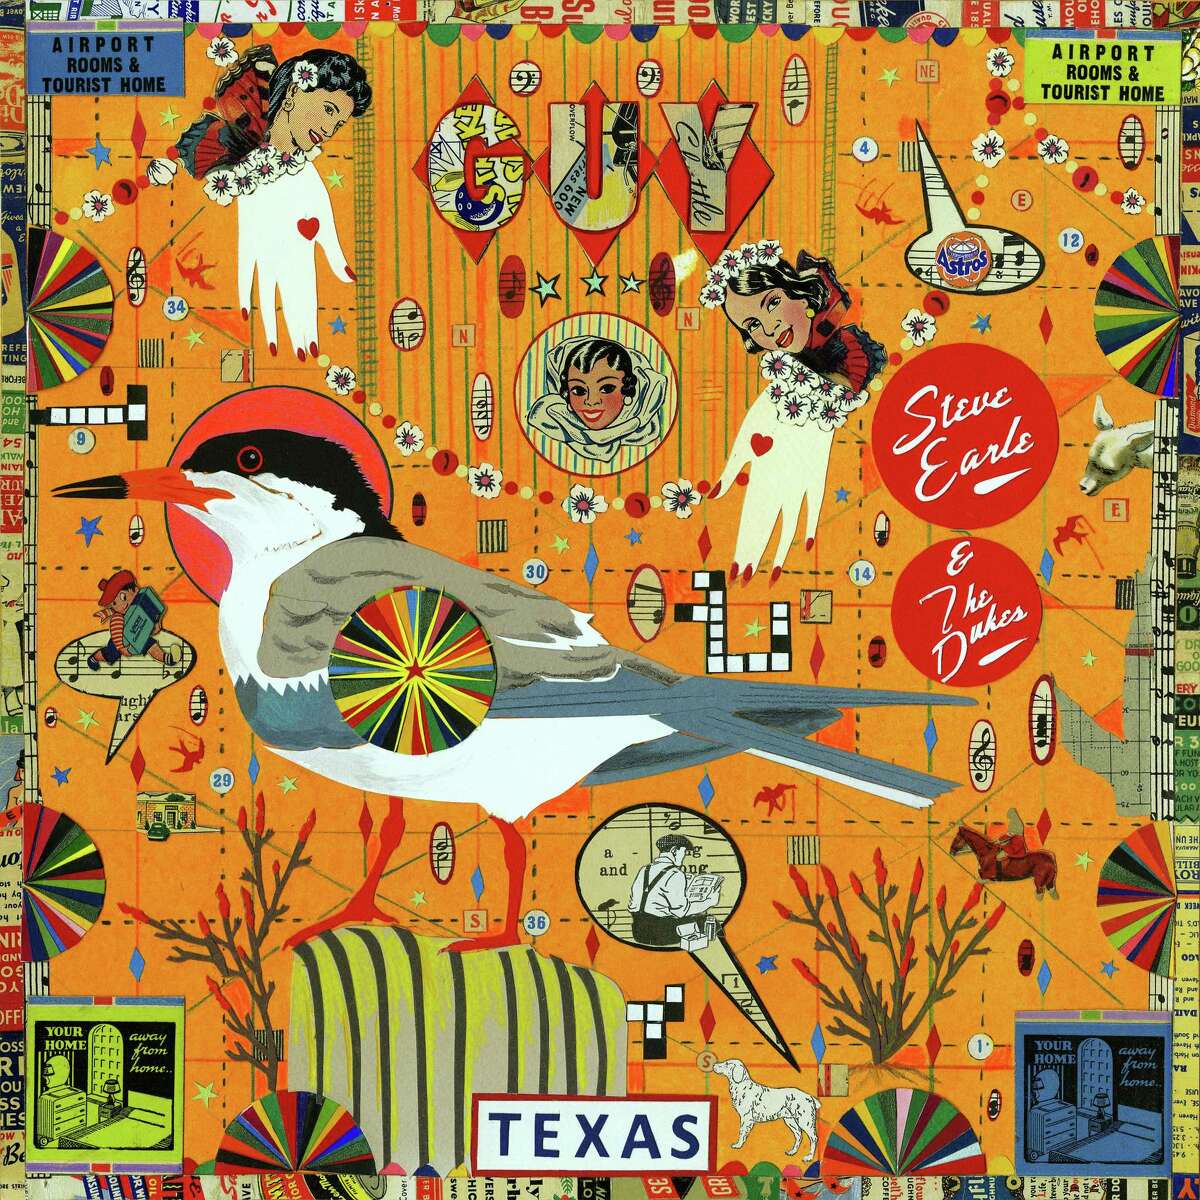 “Guy” is Steve Earle’s tribute to his friend and mentor Guy Clark.